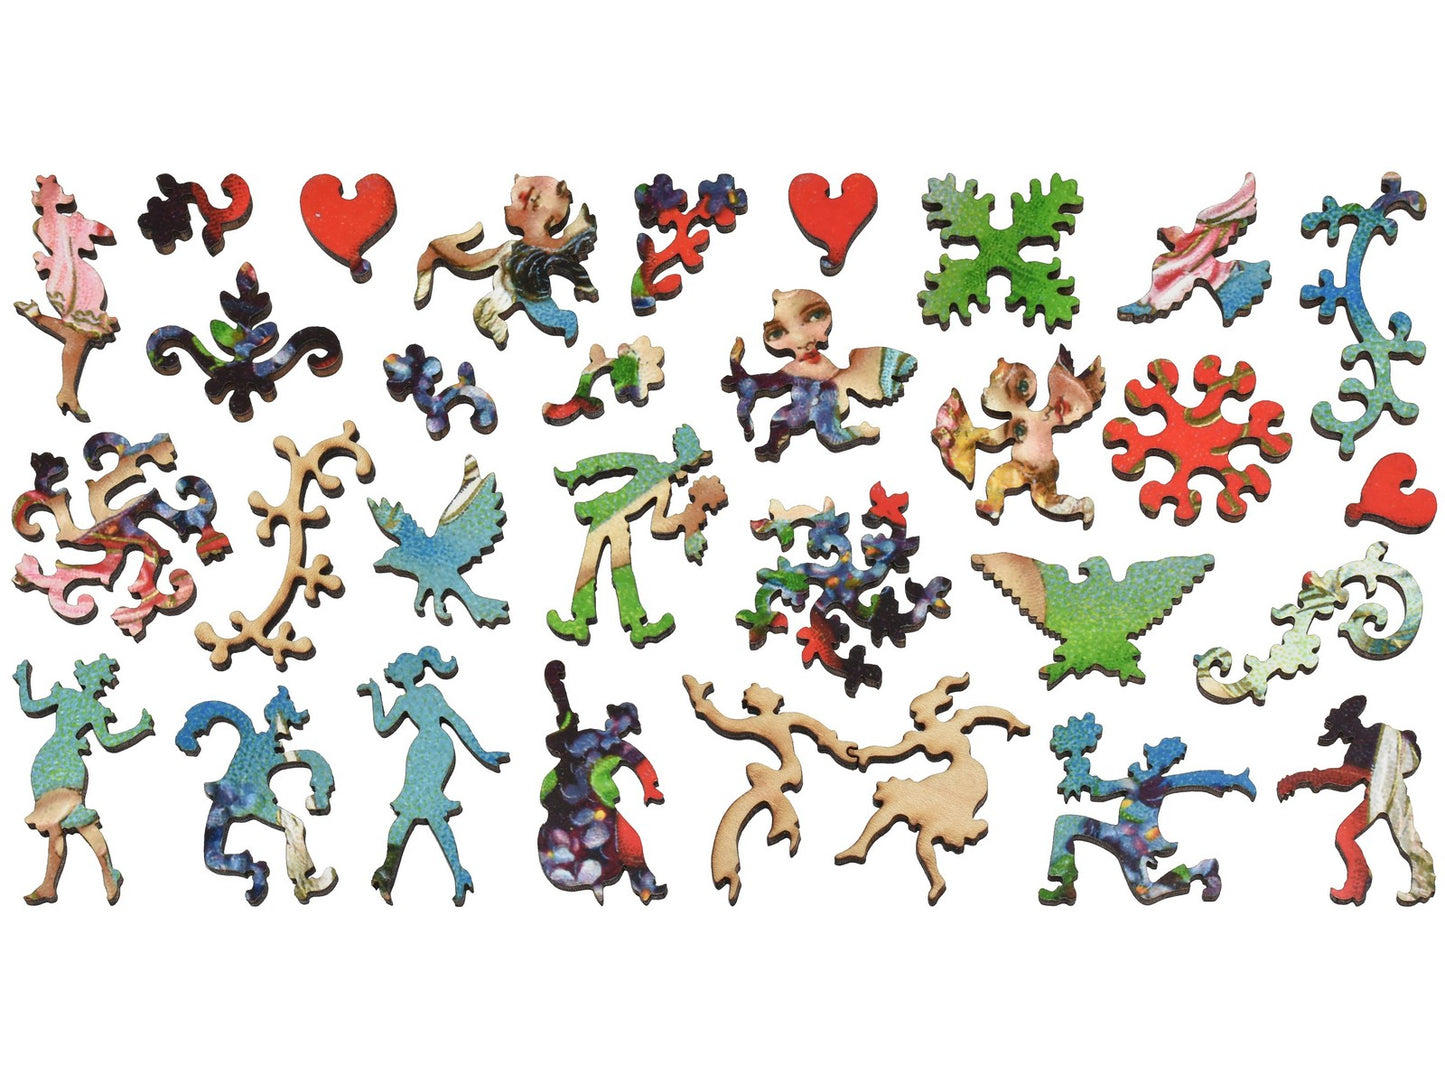 The whimsies that can be found in the puzzle, Valentine with Cherubs.